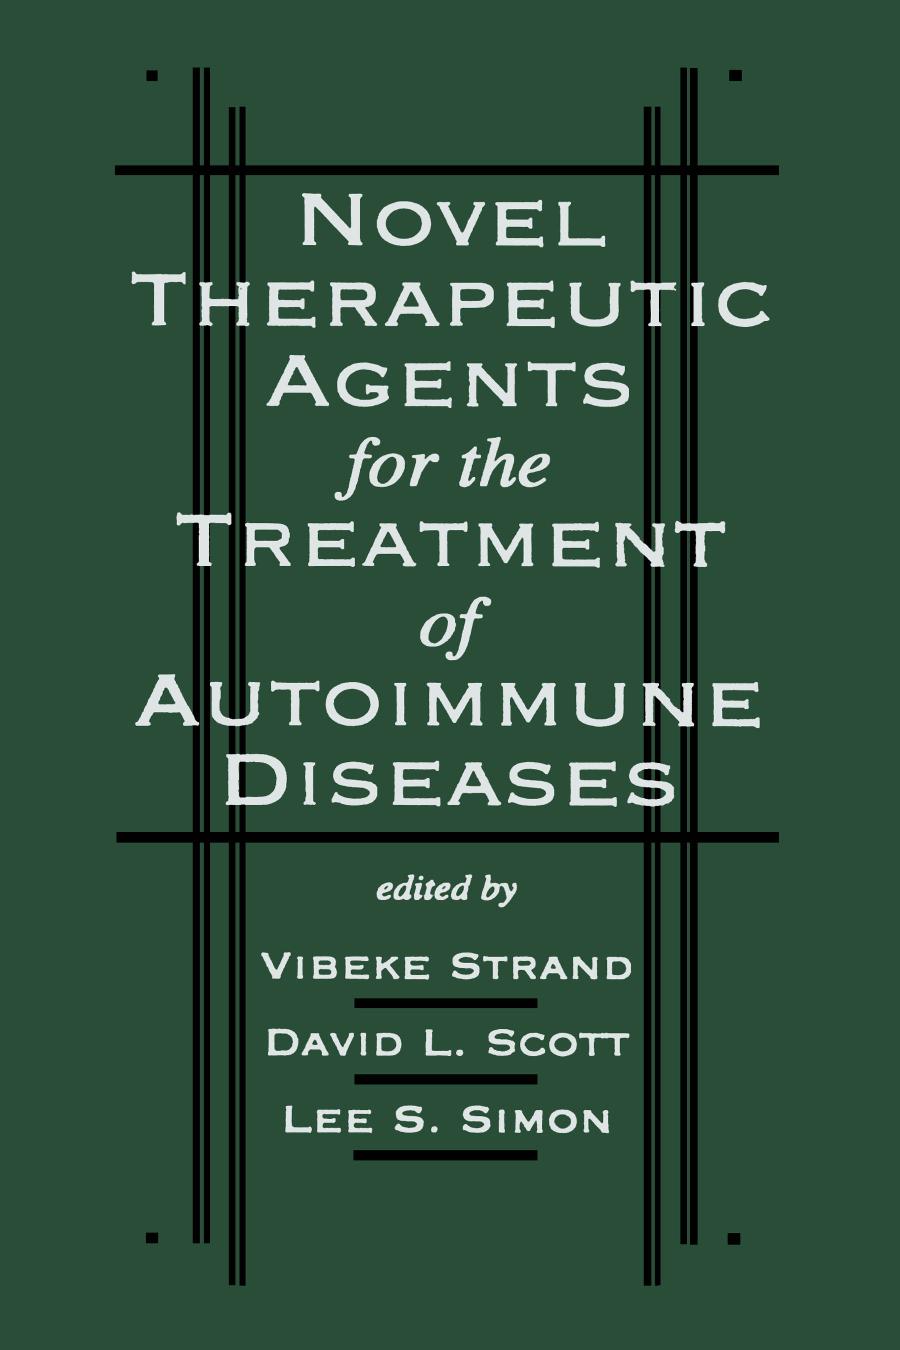 Novel therapeutic agents for the treatment of autoimmune diseases